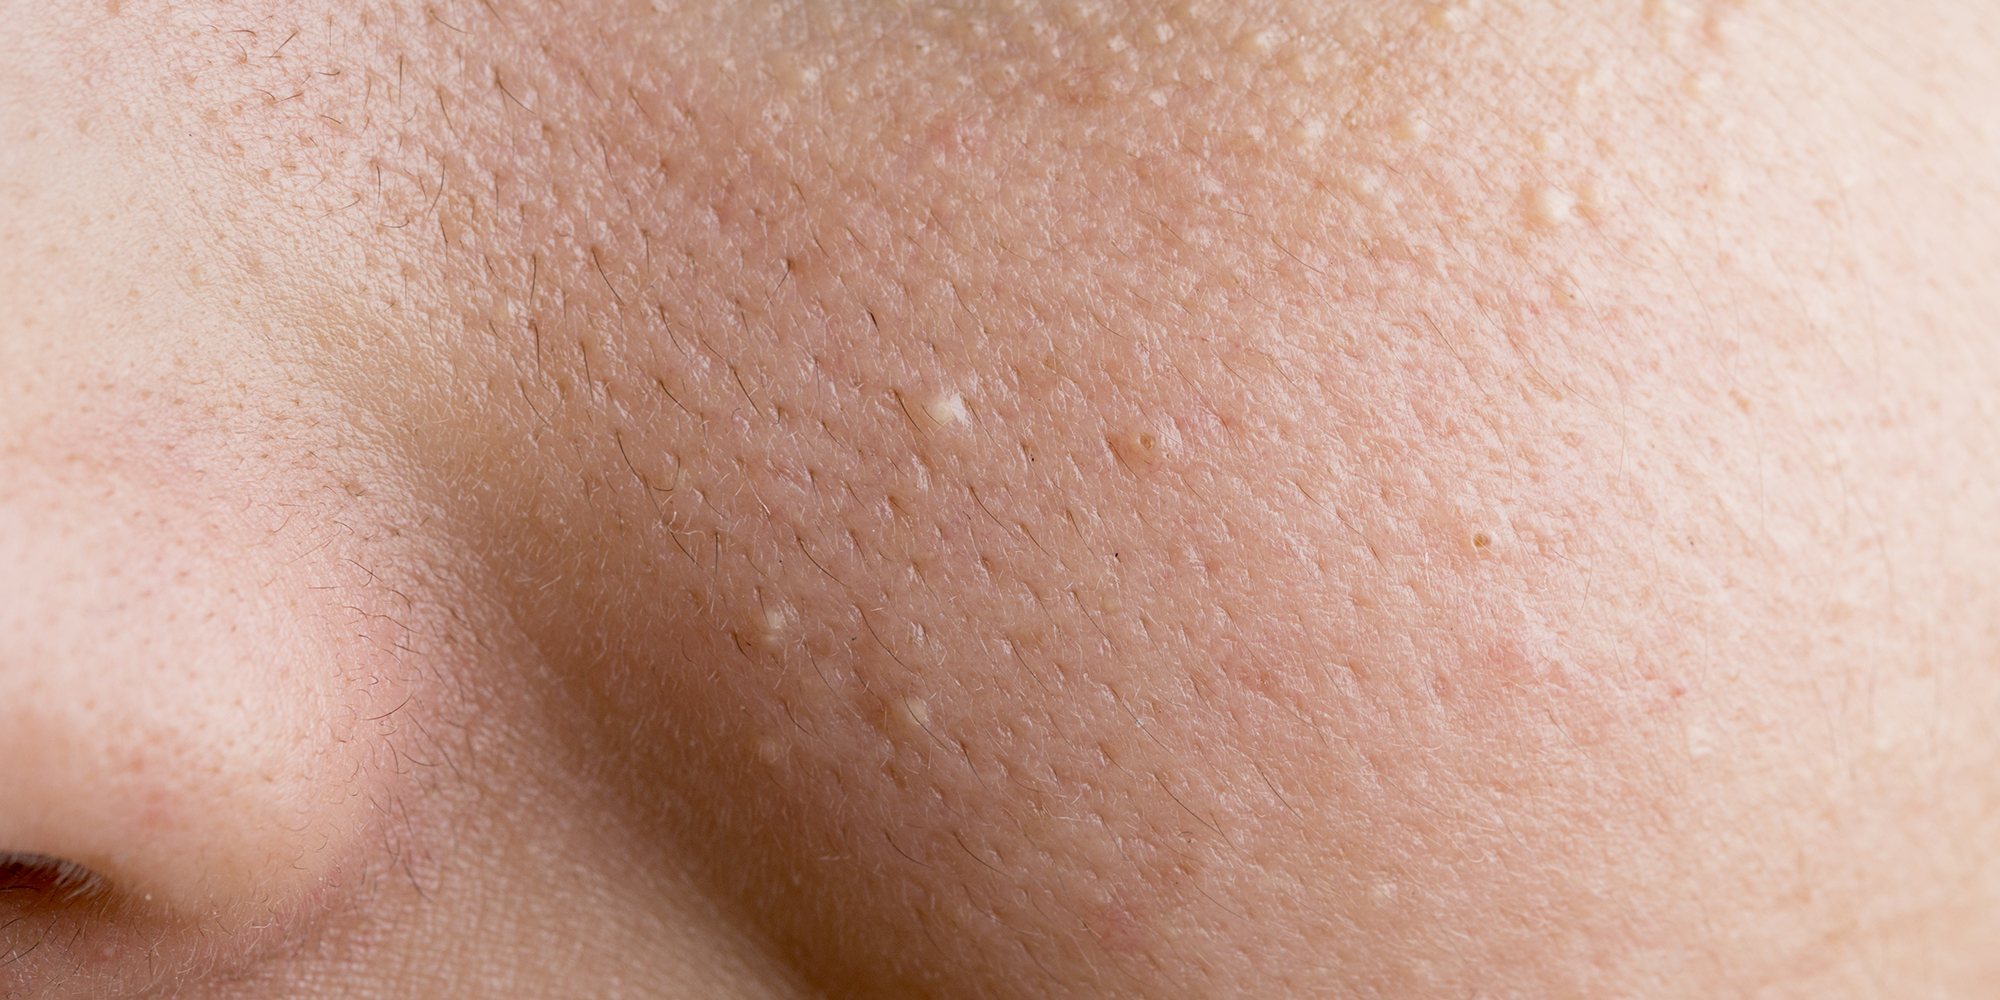 Why we get little white dots under our skin